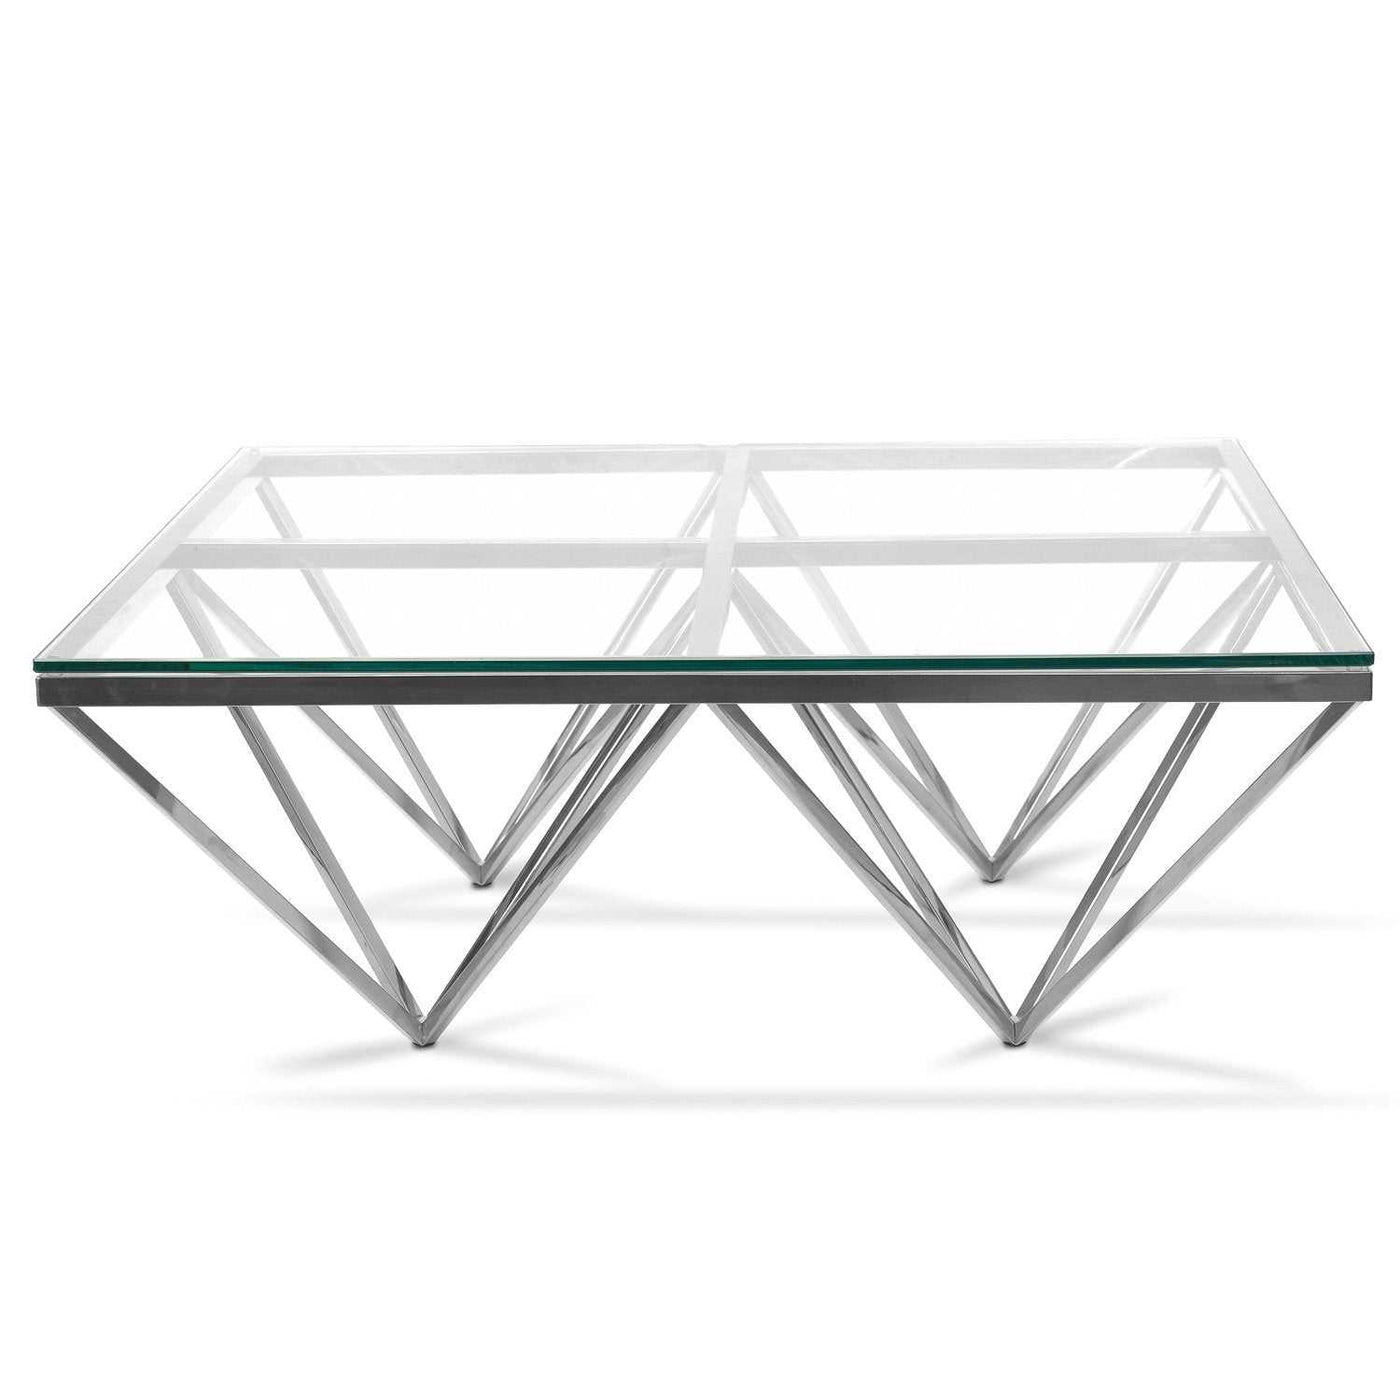 105cm Coffee Table - Glass Top - Silver Base